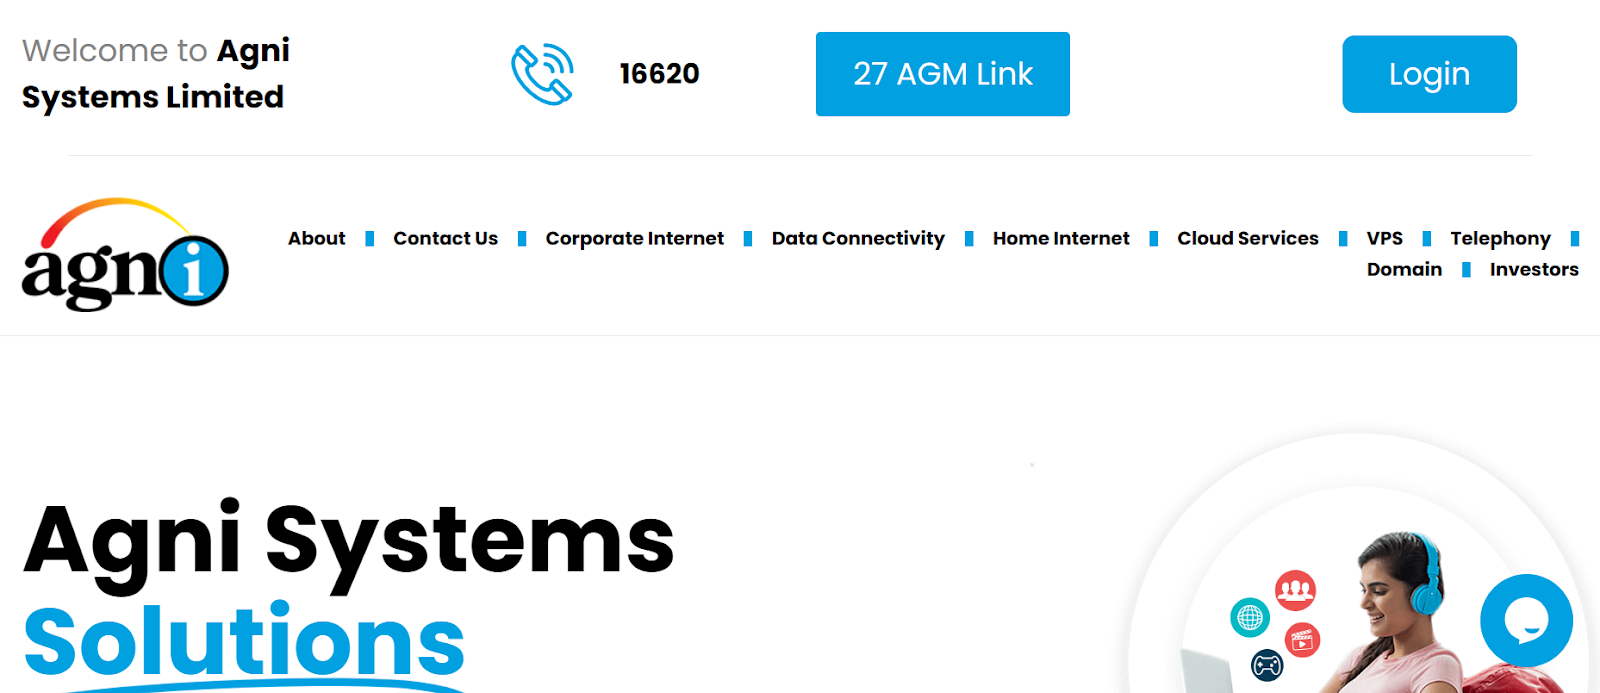 Agni Systems Limited website snapshot highlighting the services it provides.